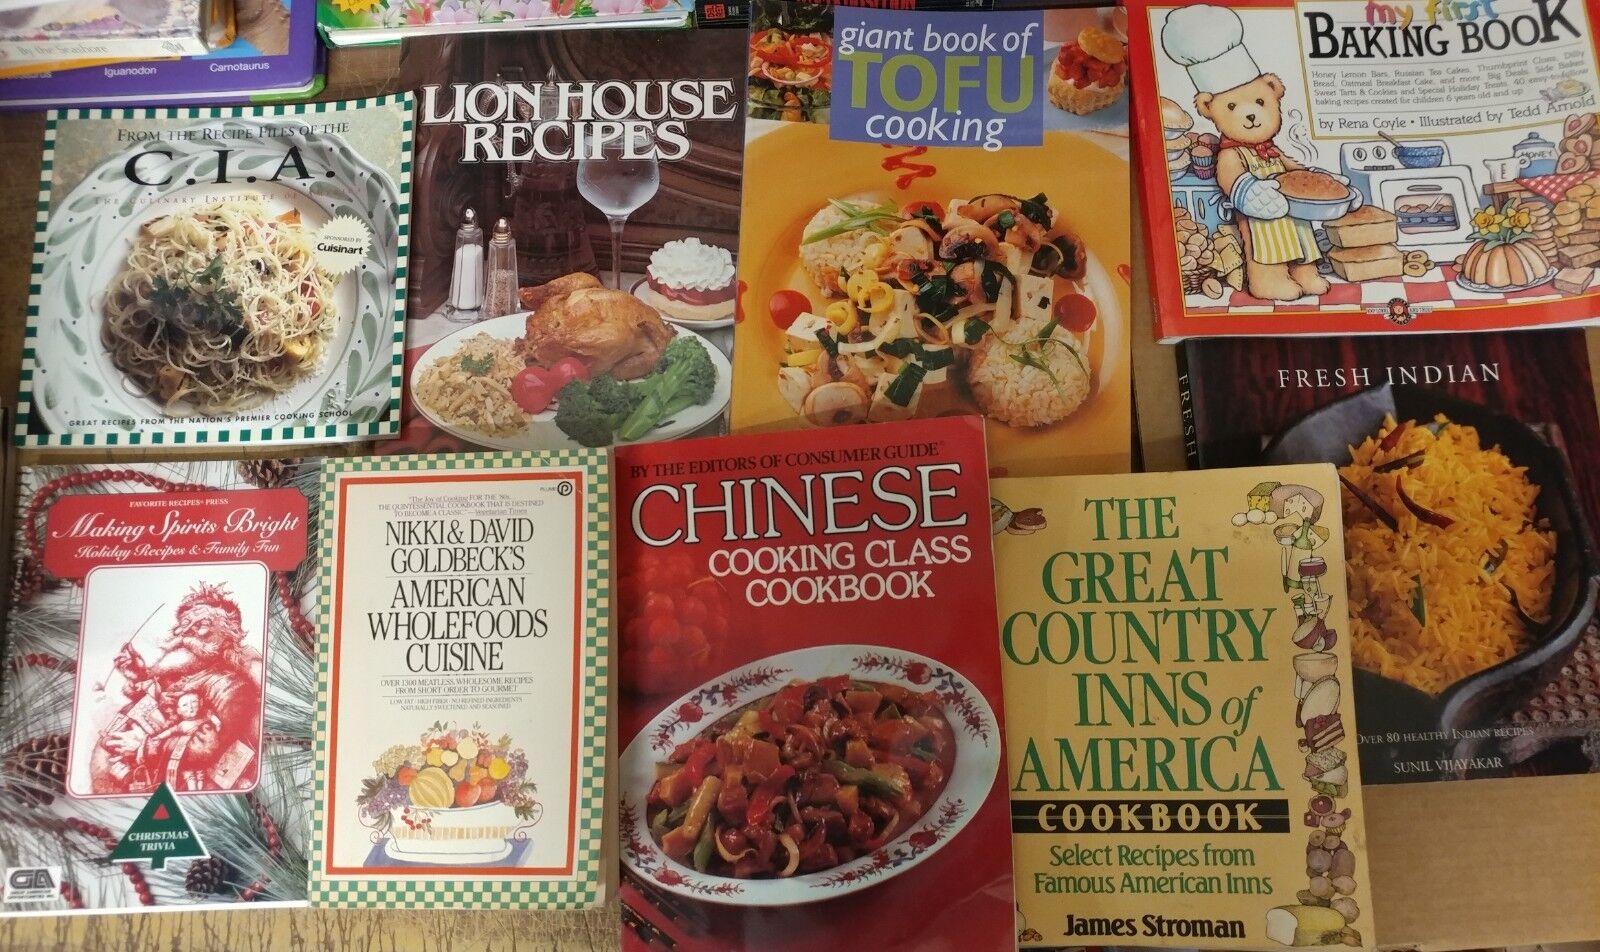 Lot of 20 Cooking Baking Recipe Grilling Low-Fat Ingredient Books MIX-UNSORTED Без бренда - фотография #10